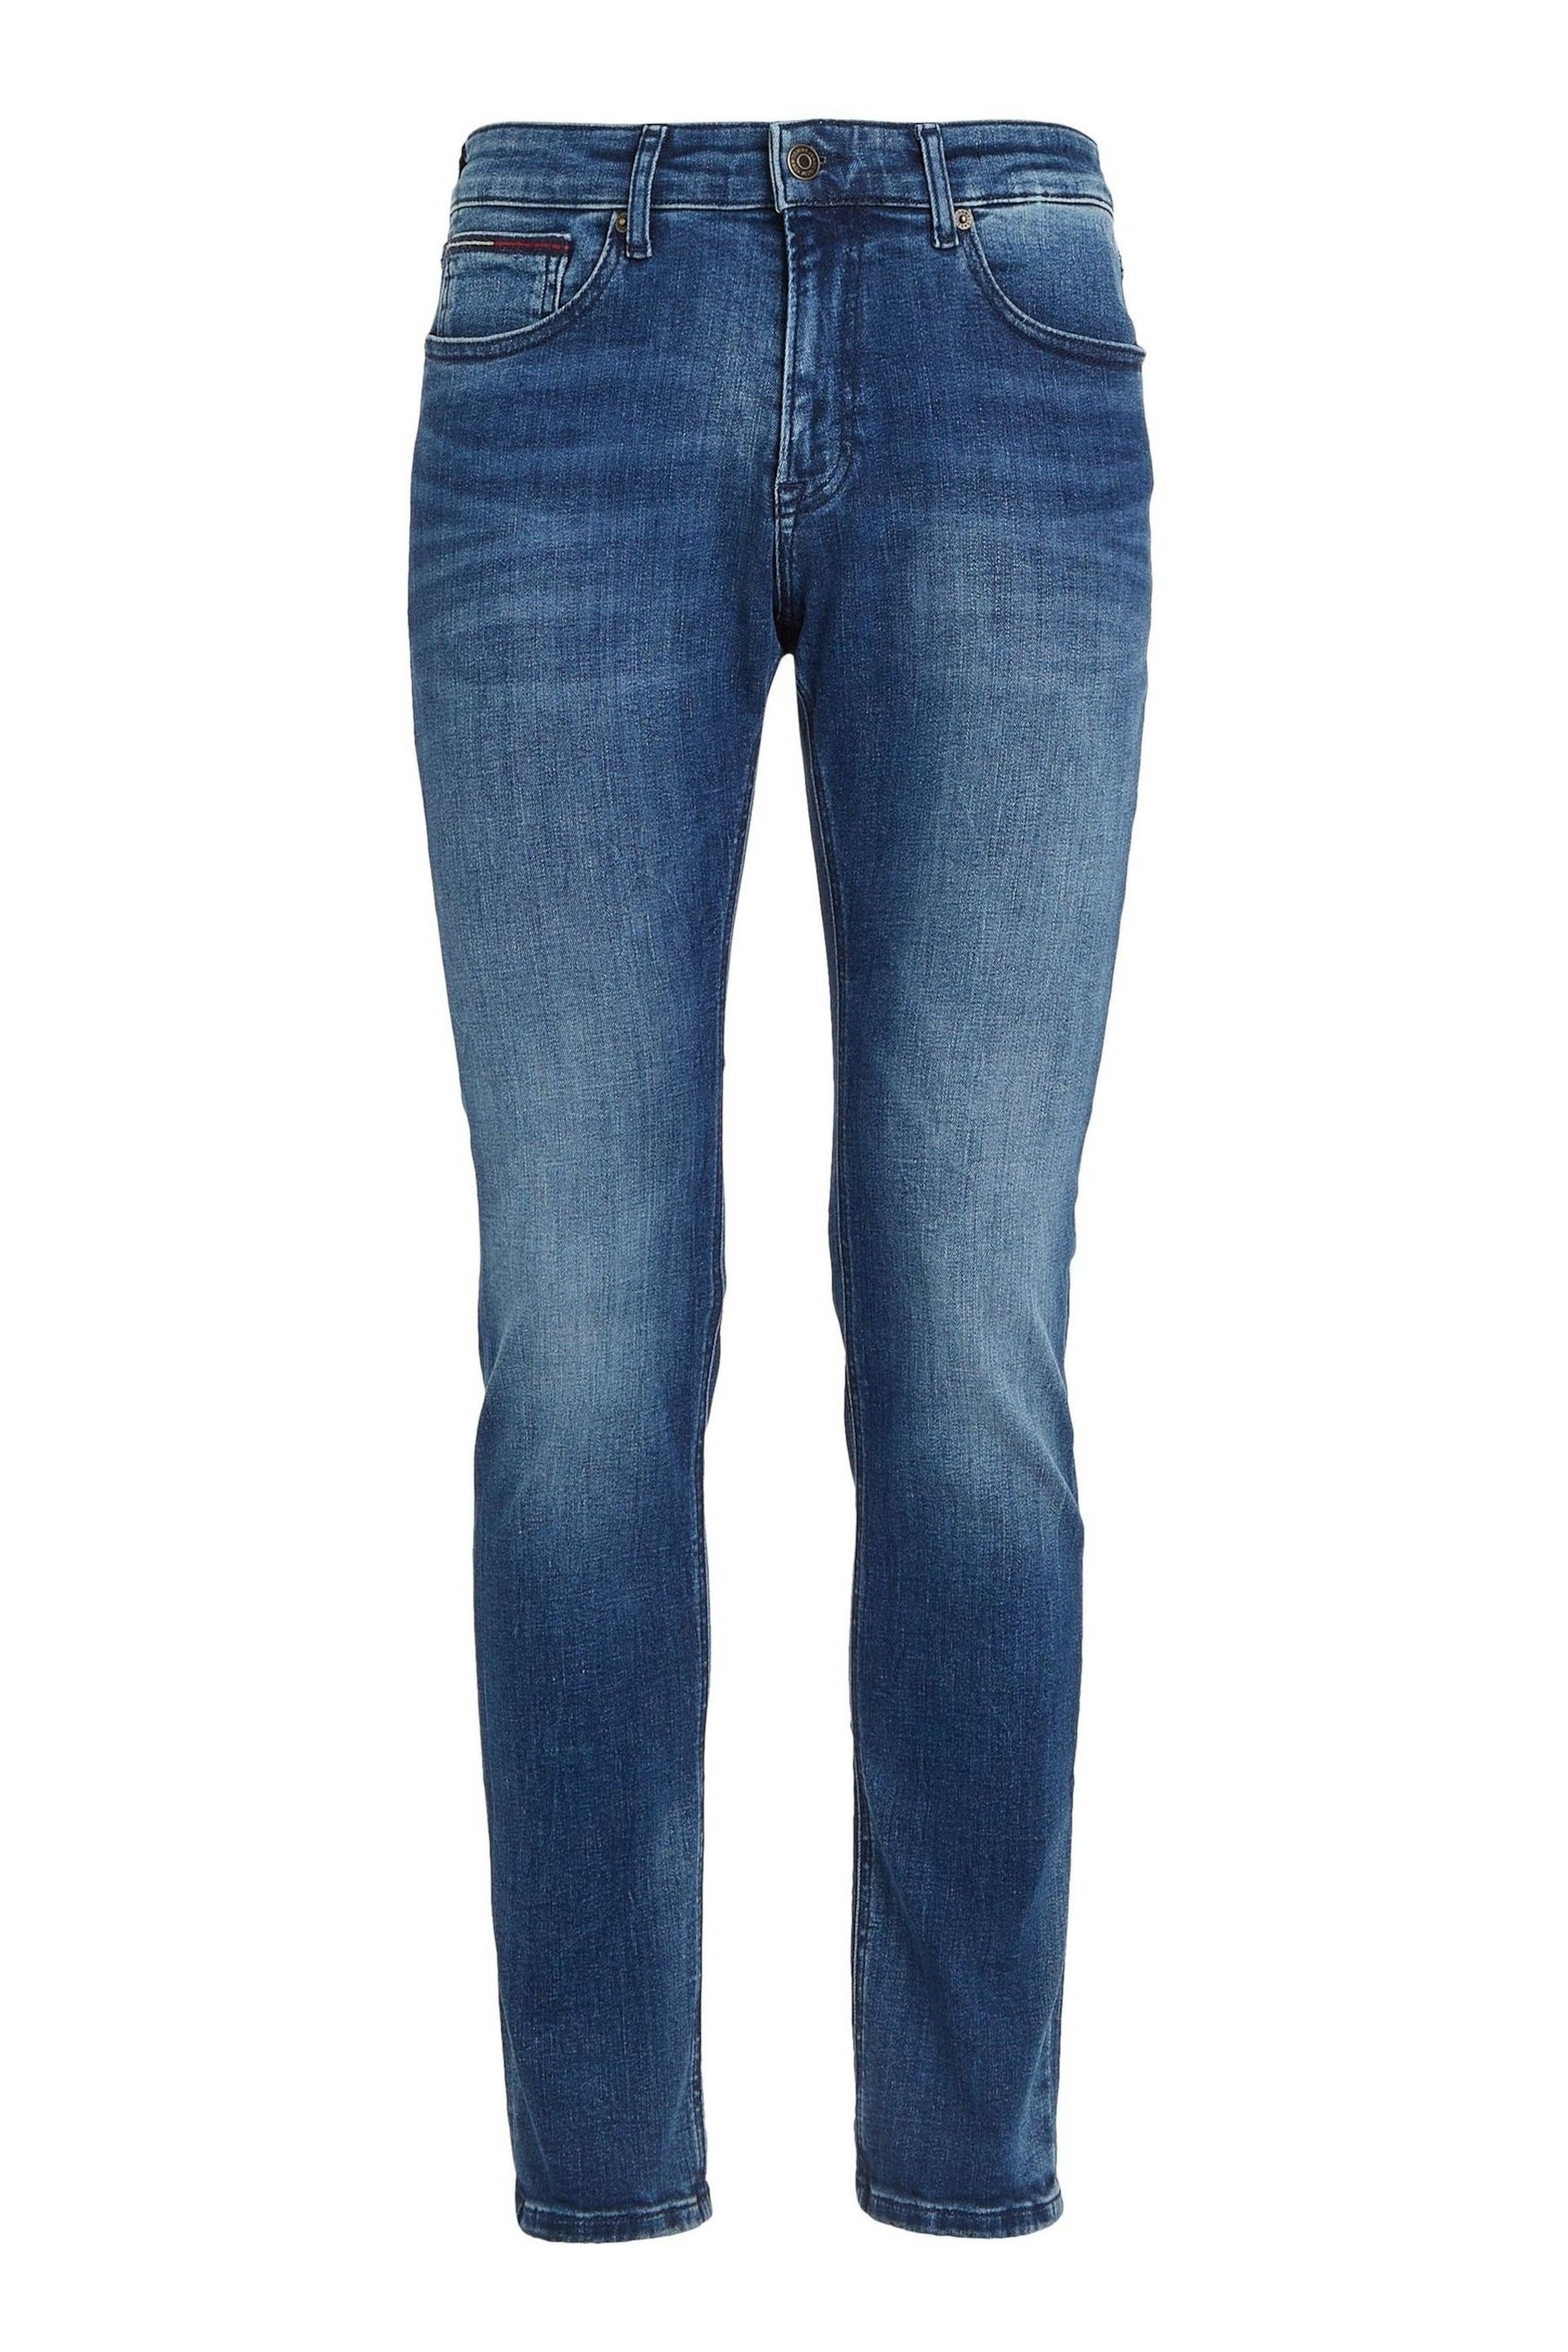 Tommy Jeans Blue Scanton Slim Fit Stretch Jeans - Image 4 of 6